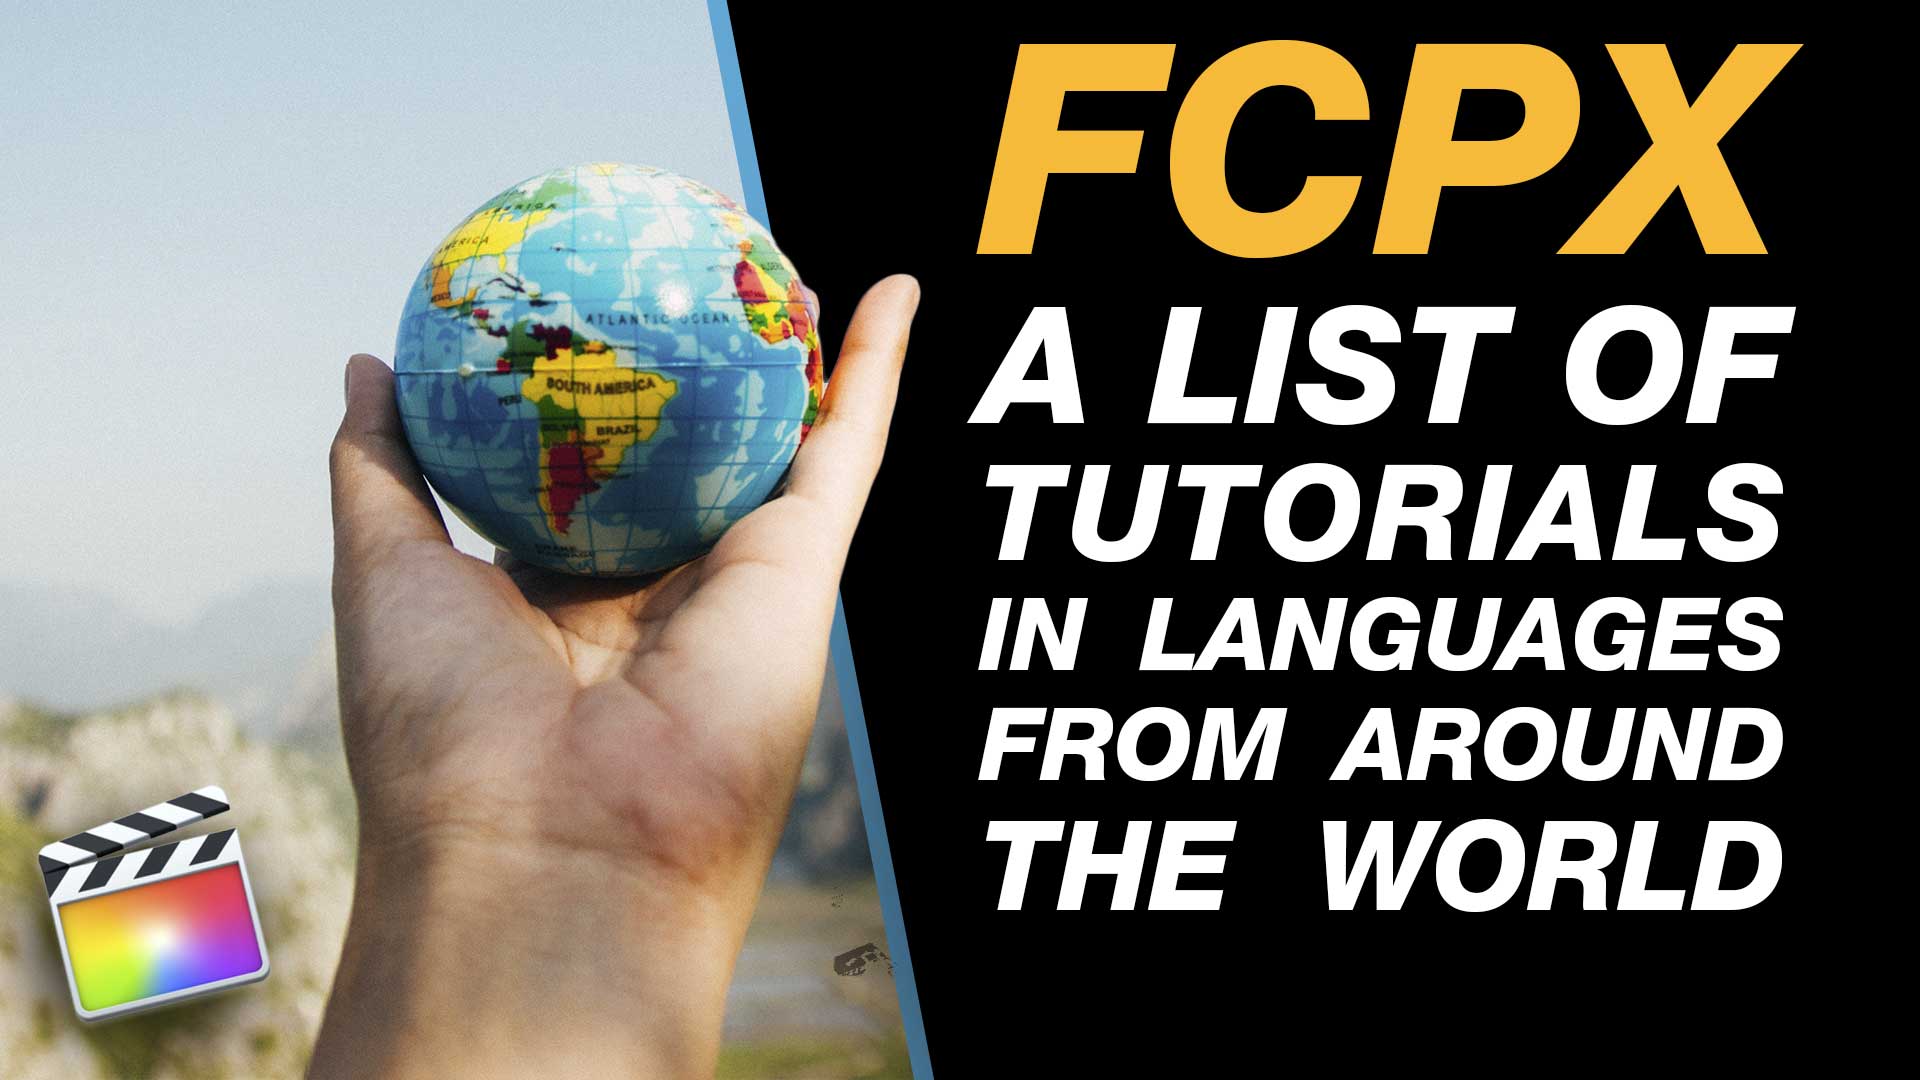 Final Cut Pro X Tutorials in other Languages (not English)